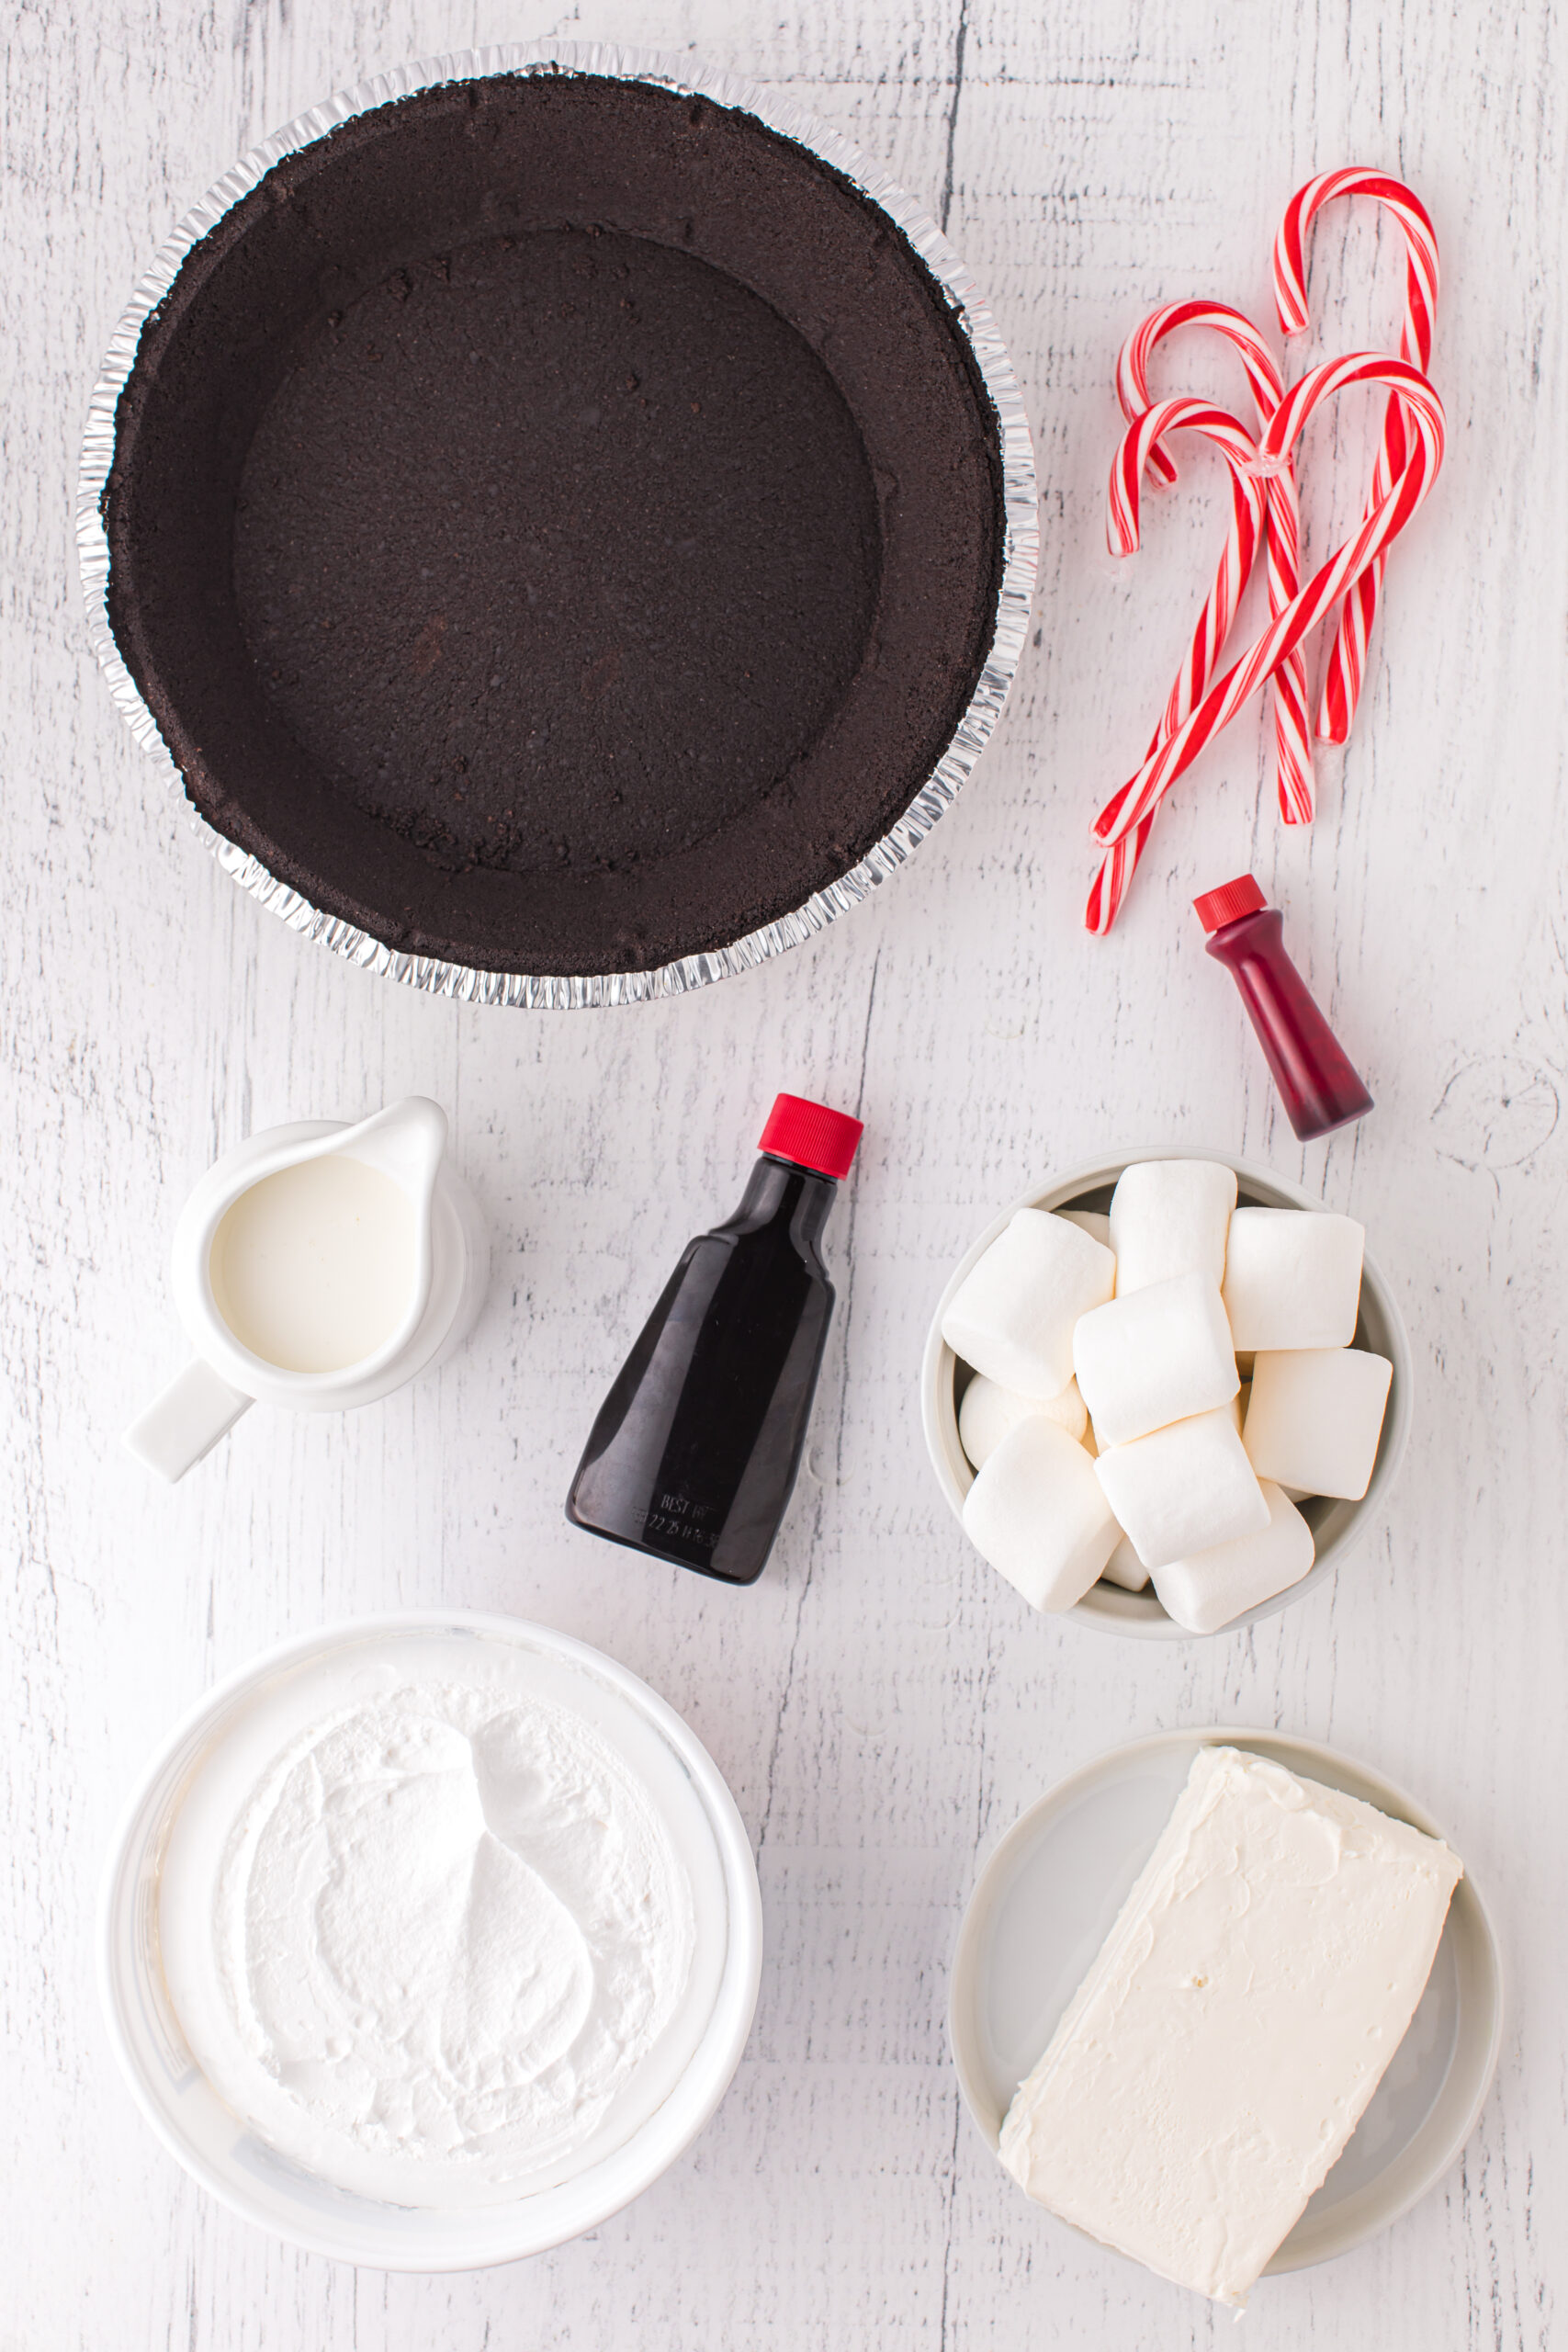 ingredients to make a no bake layered peppermint pie. oreo pie crust, peppermint extract, whipped topping, brick of cream cheese, large marshmallows, red and white striped candy canes